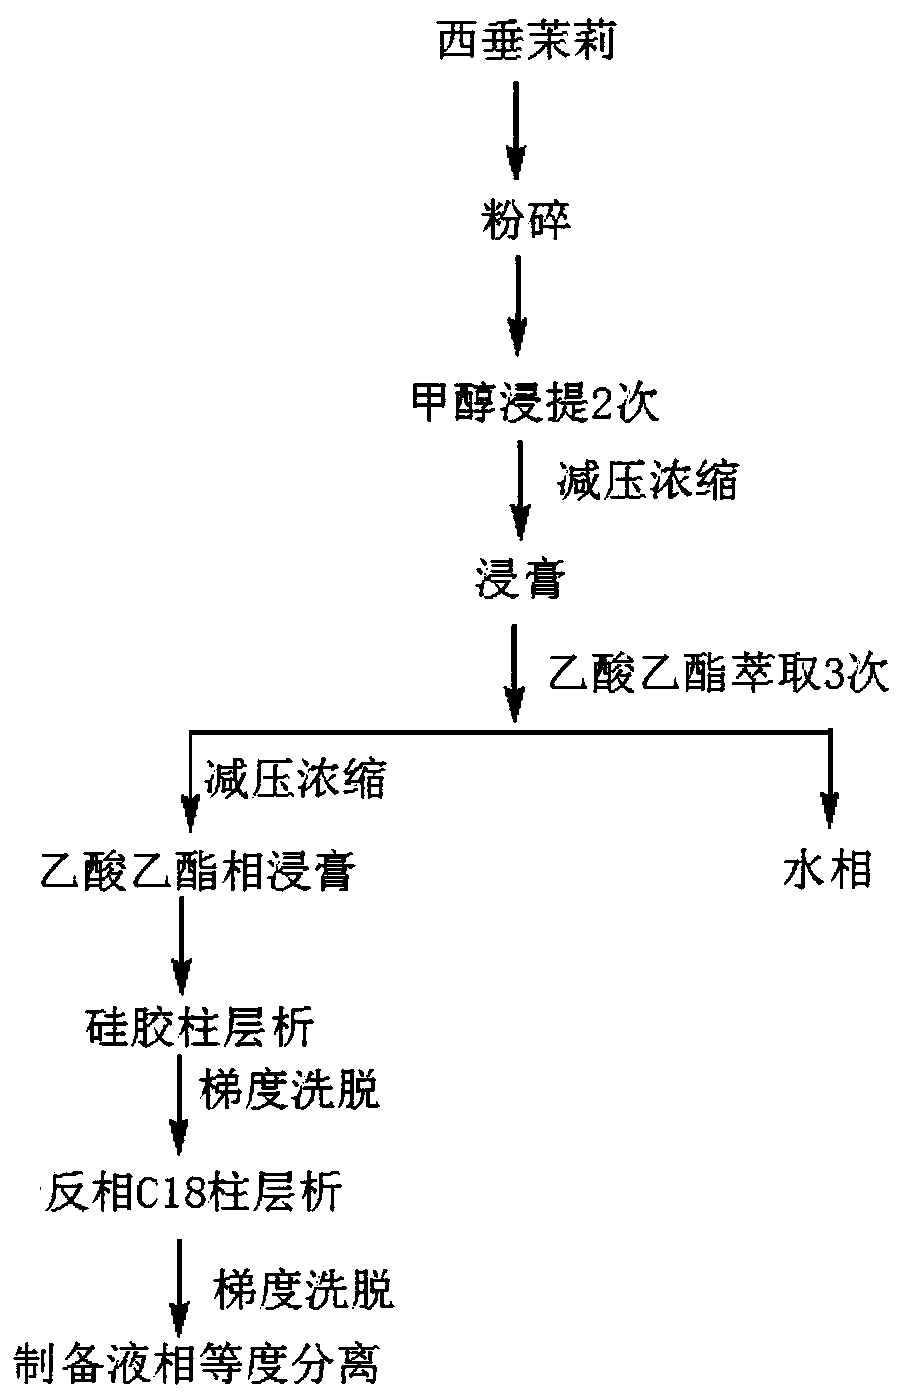 Diepoxy diterpene compound with anti-tumor effect as well as preparation method and application